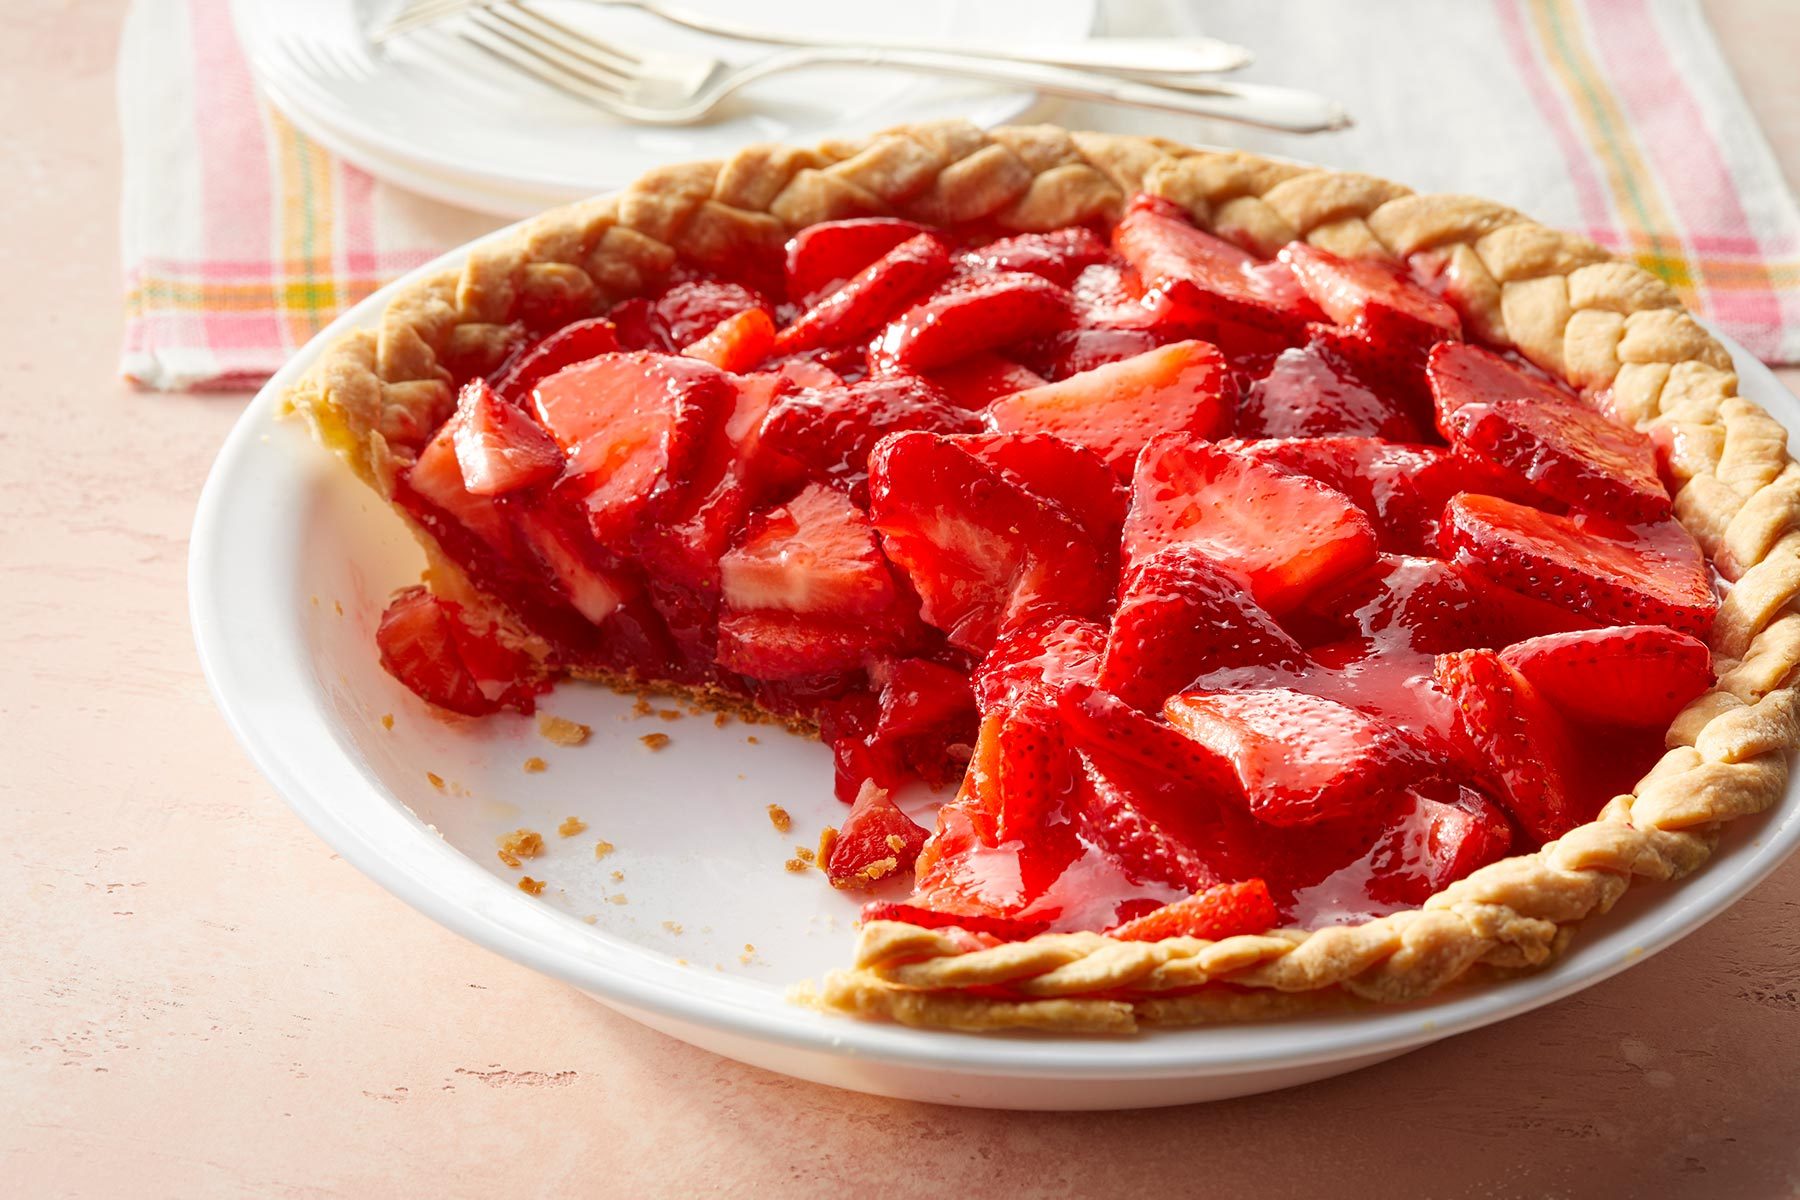 Strawberry Pie topped with strawberries